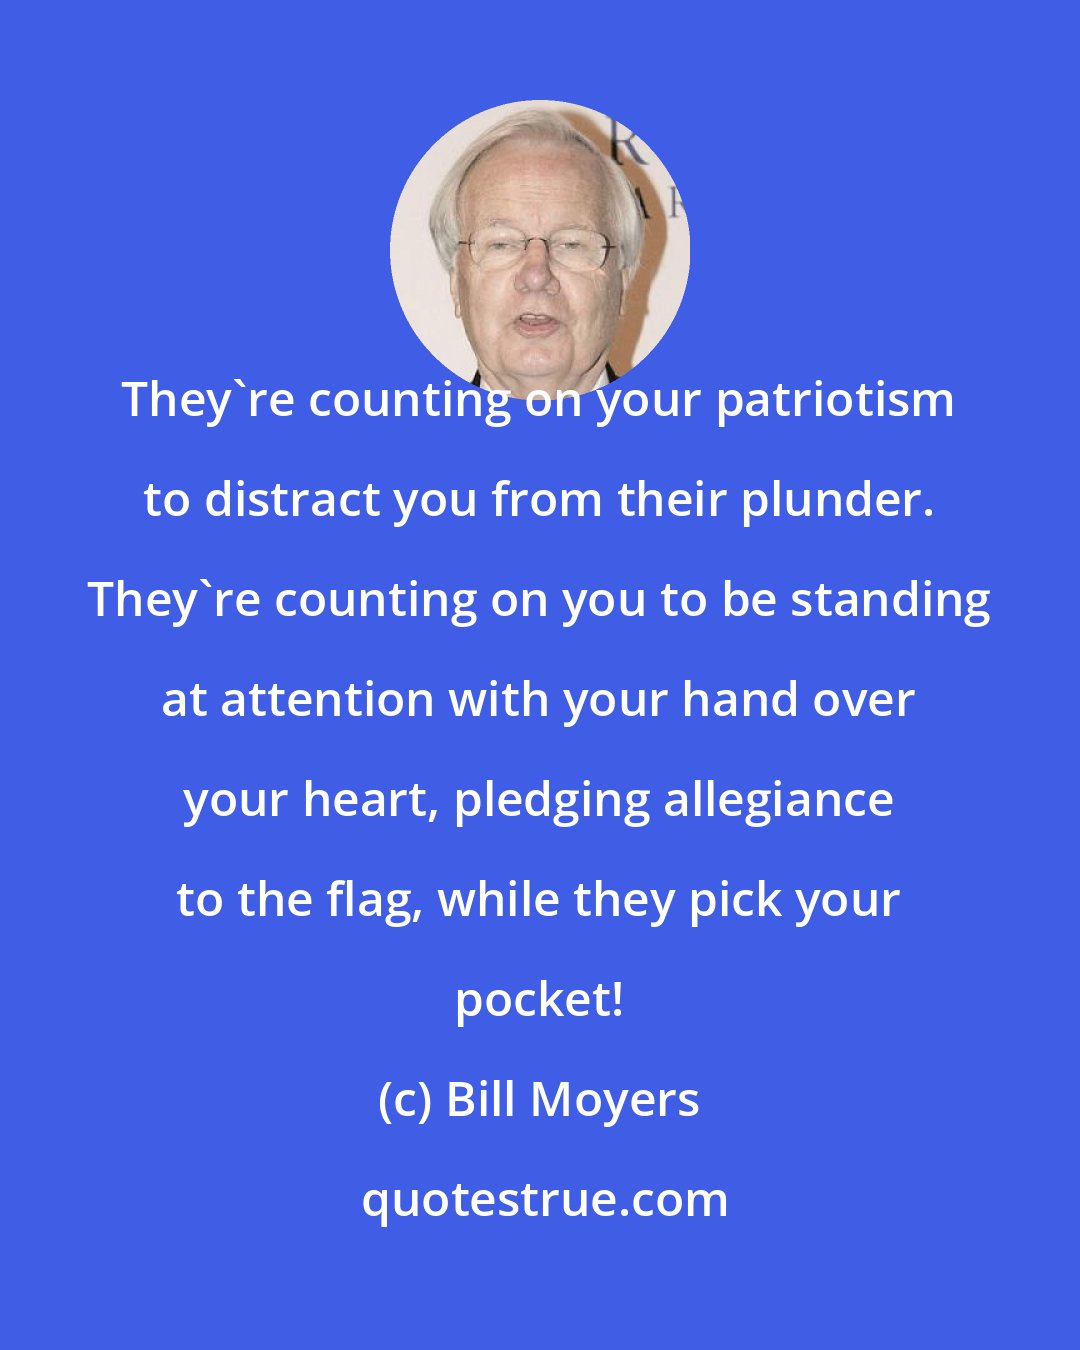 Bill Moyers: They're counting on your patriotism to distract you from their plunder. They're counting on you to be standing at attention with your hand over your heart, pledging allegiance to the flag, while they pick your pocket!